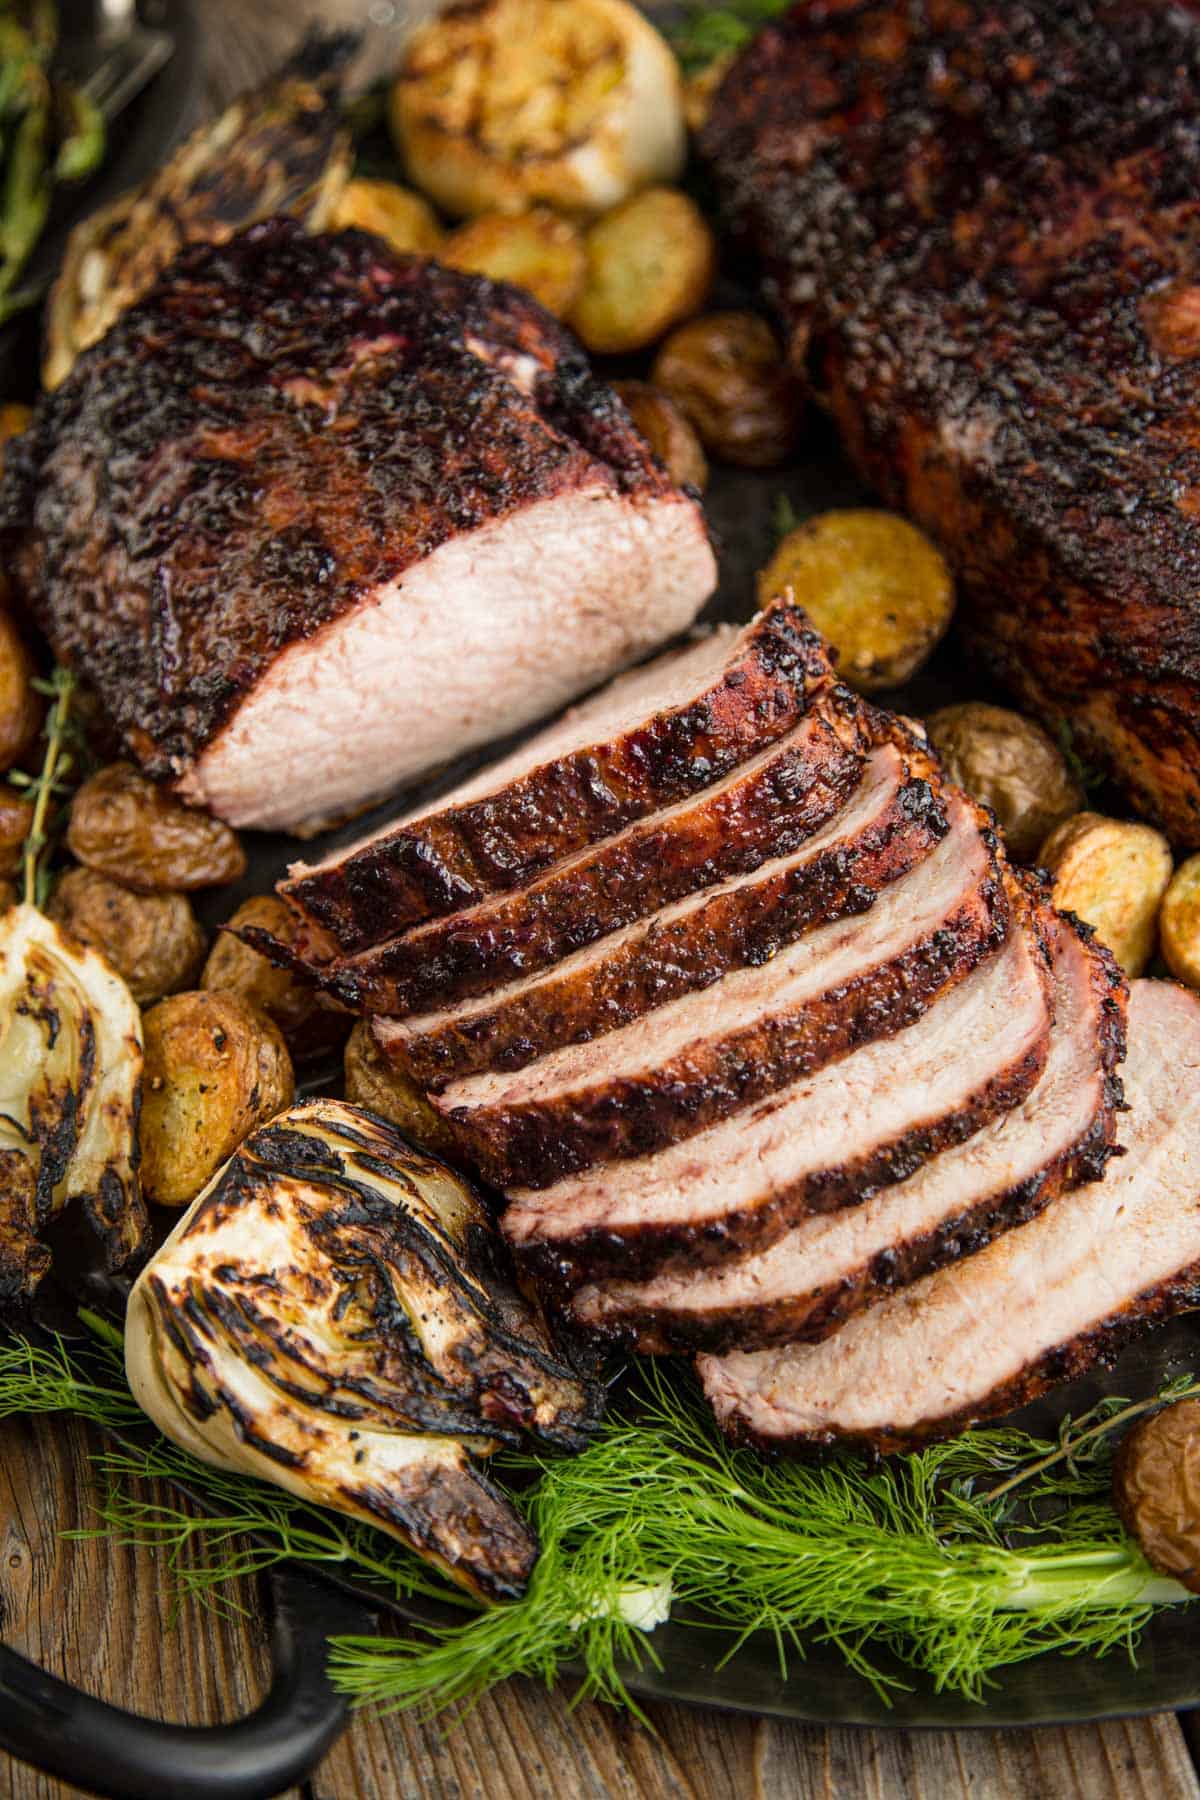 Slices of Grilled Pork Loin on a platter with roasted potatoes